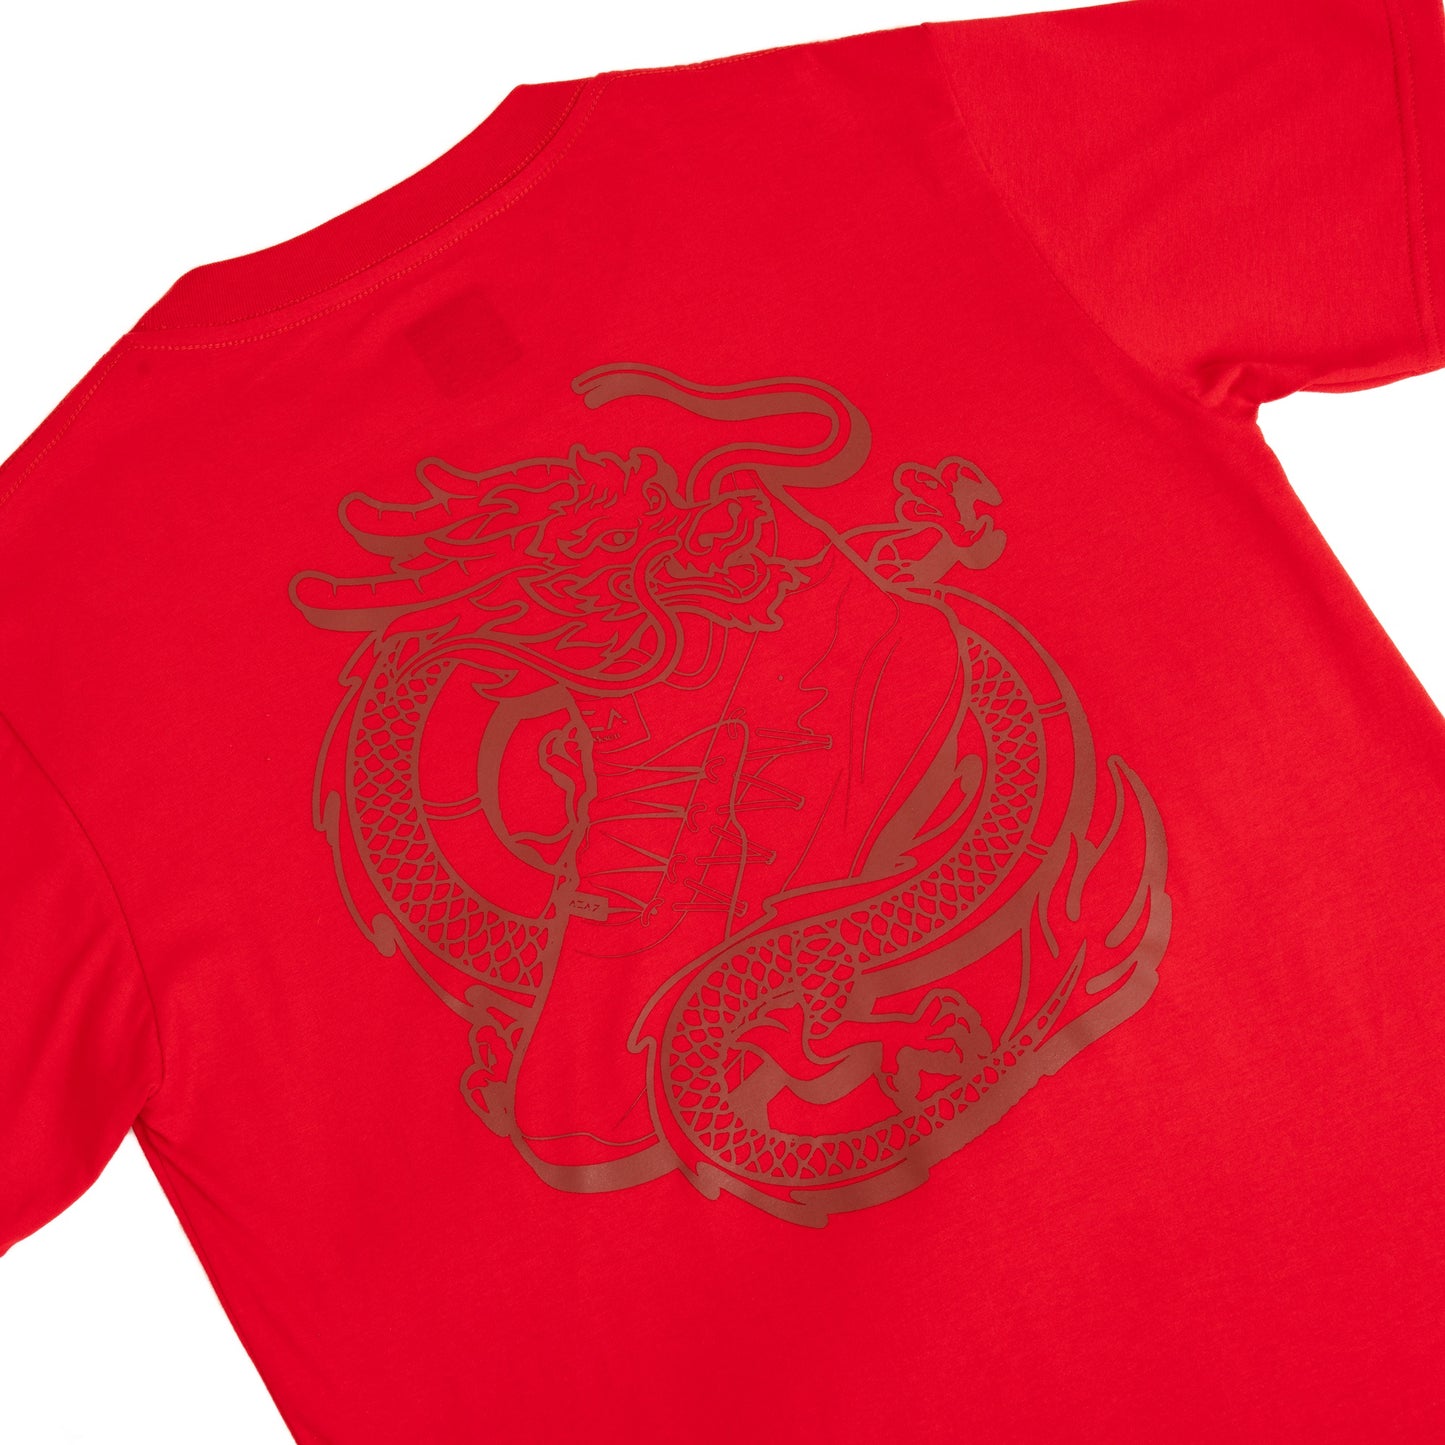 AZA T-Shirt CNY Edition Year of The Dragon - Red